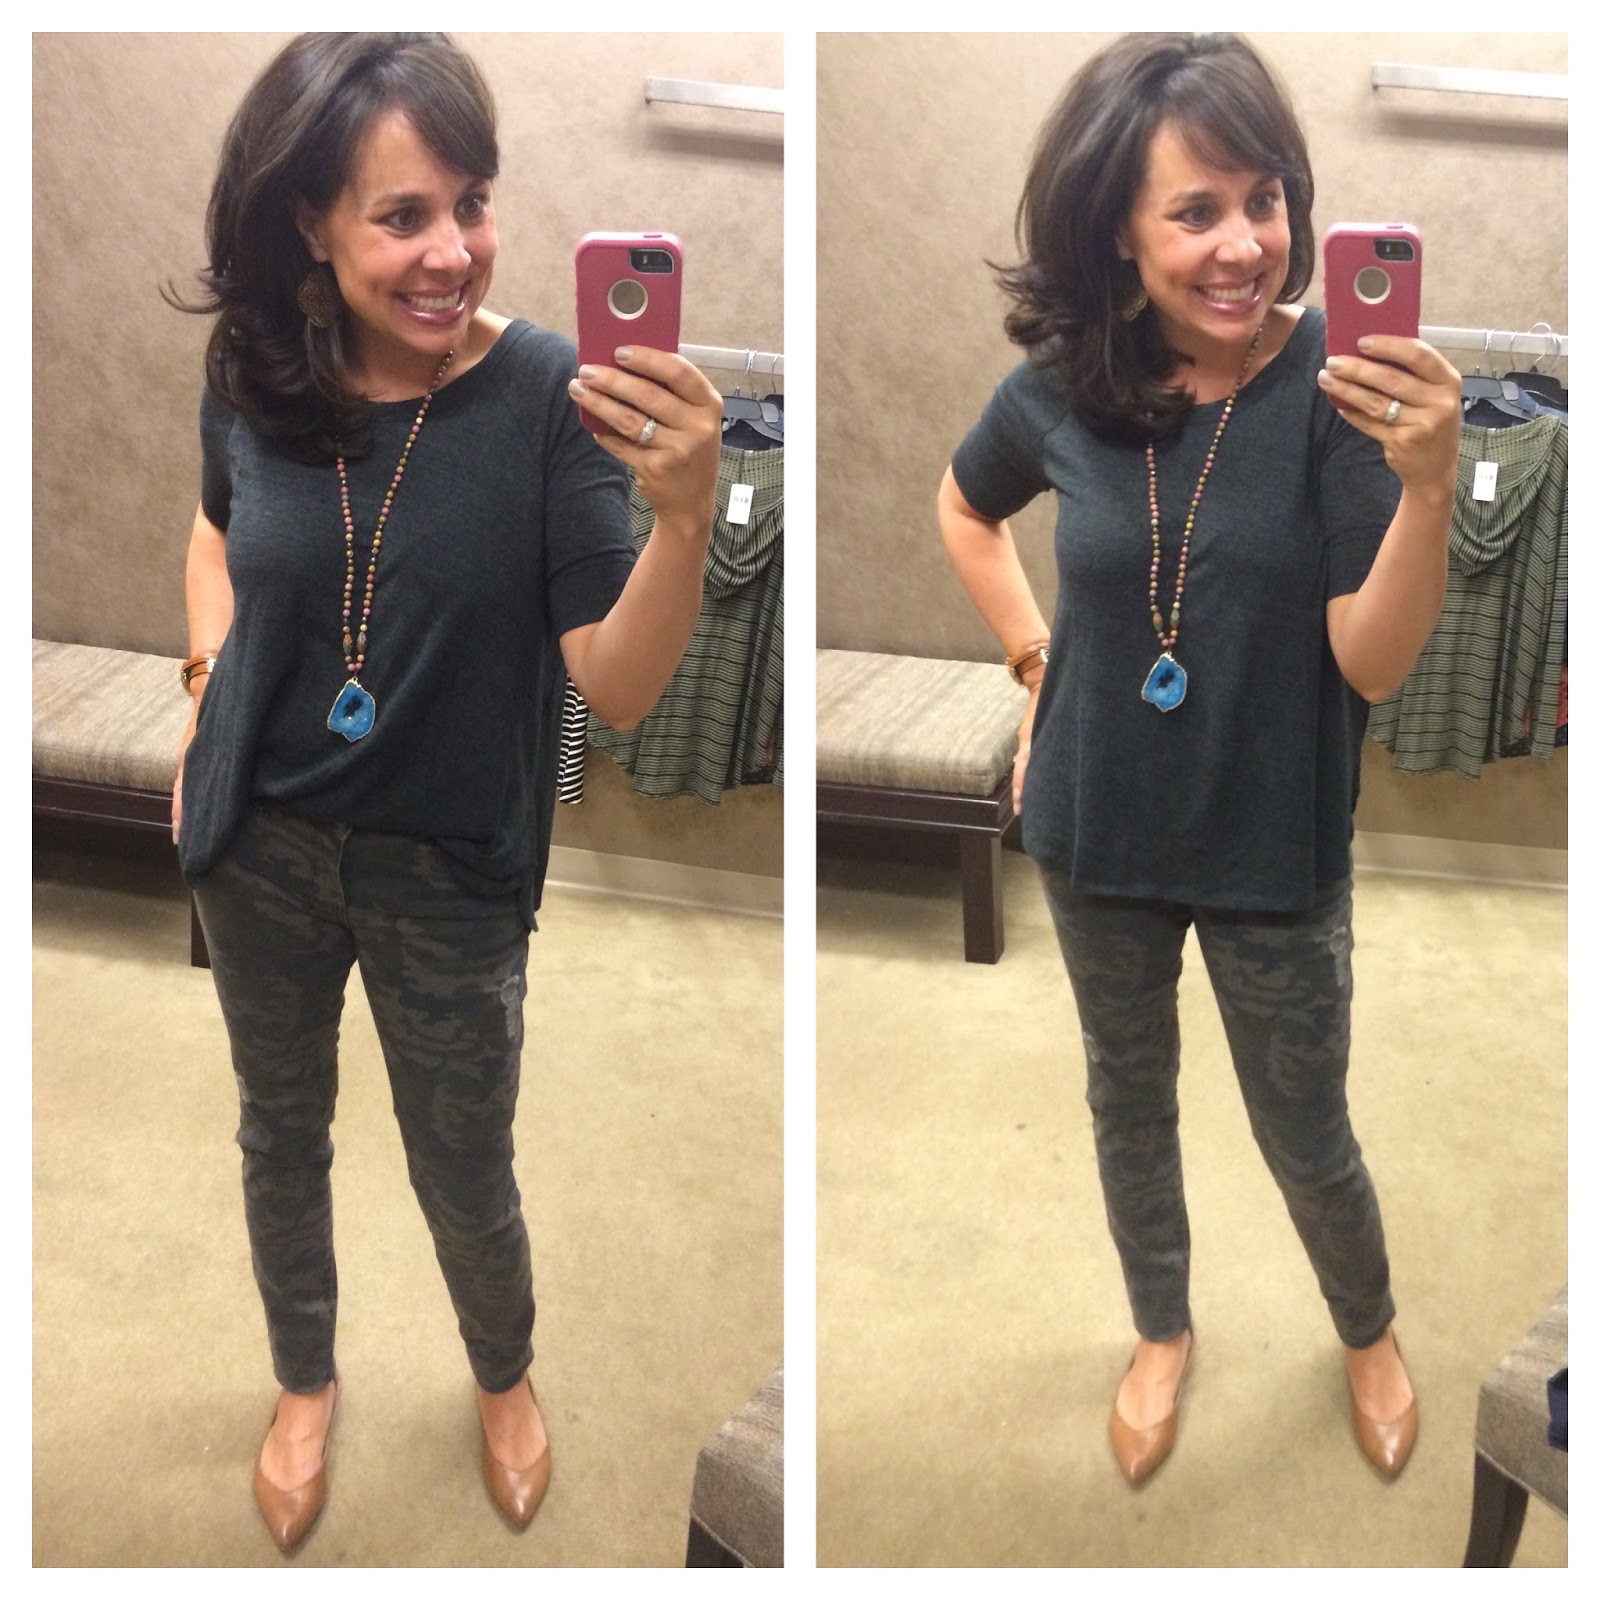 CAMO LOVE: Camo Pants Styled 3 Ways — Sheaffer Told Me To